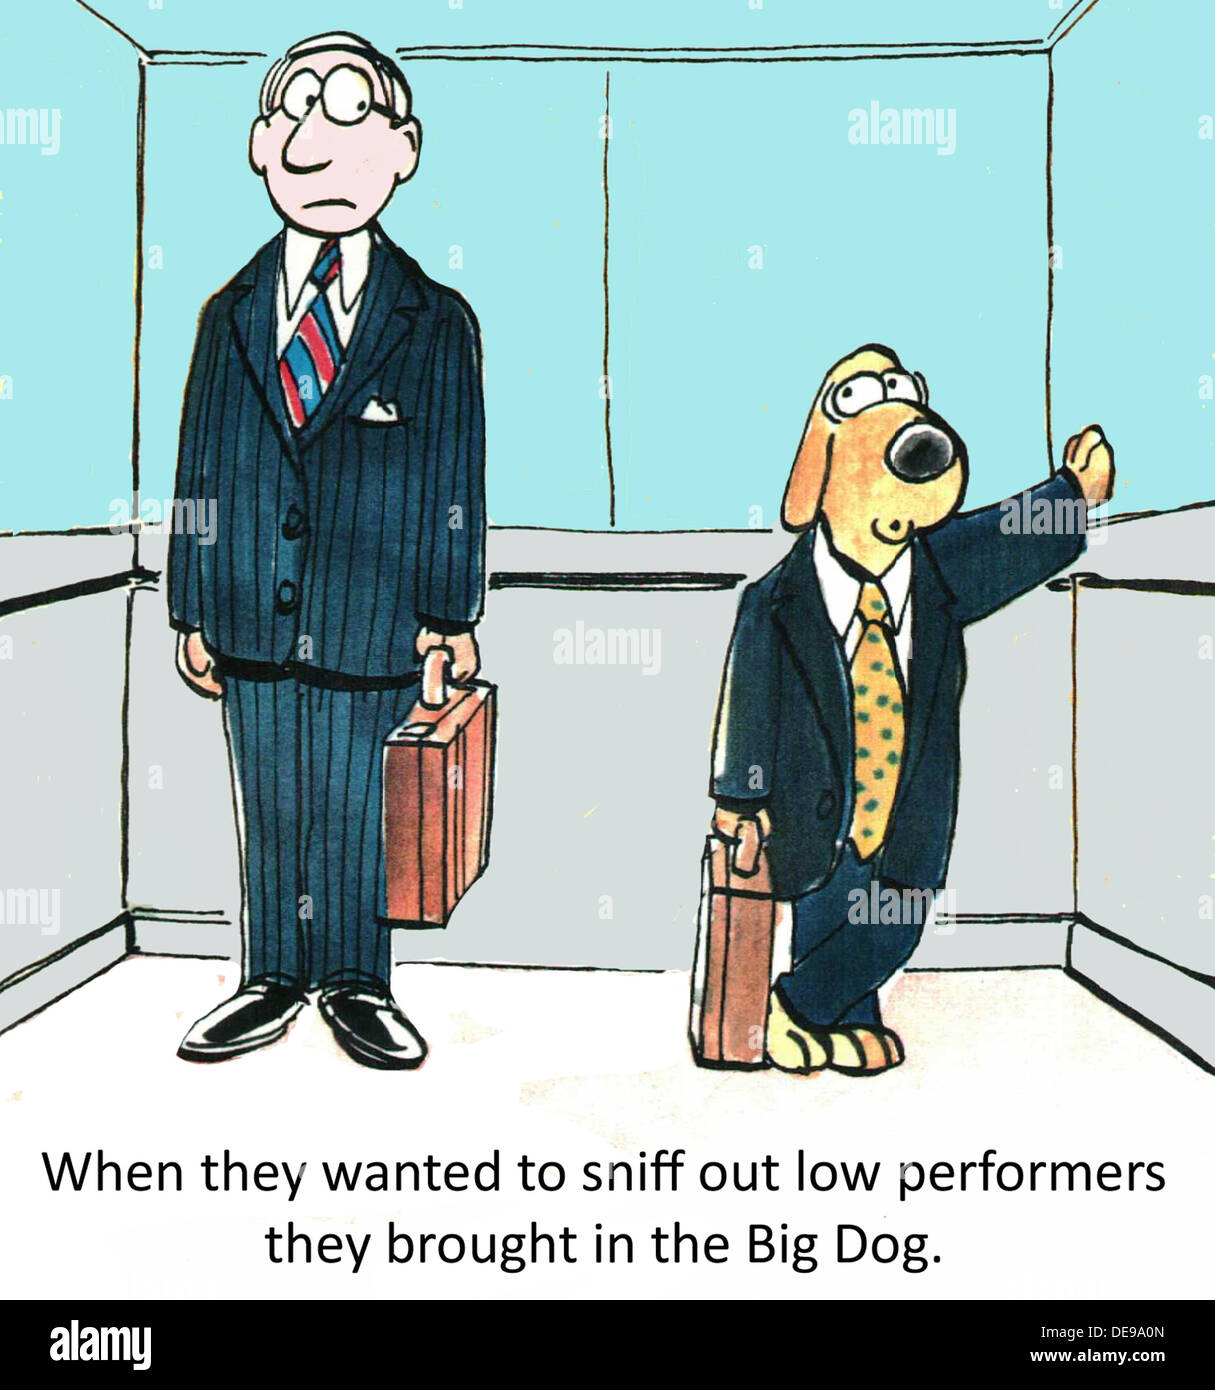 When they wanted to sniff out low performers they brought in the Big Dog. Stock Photo